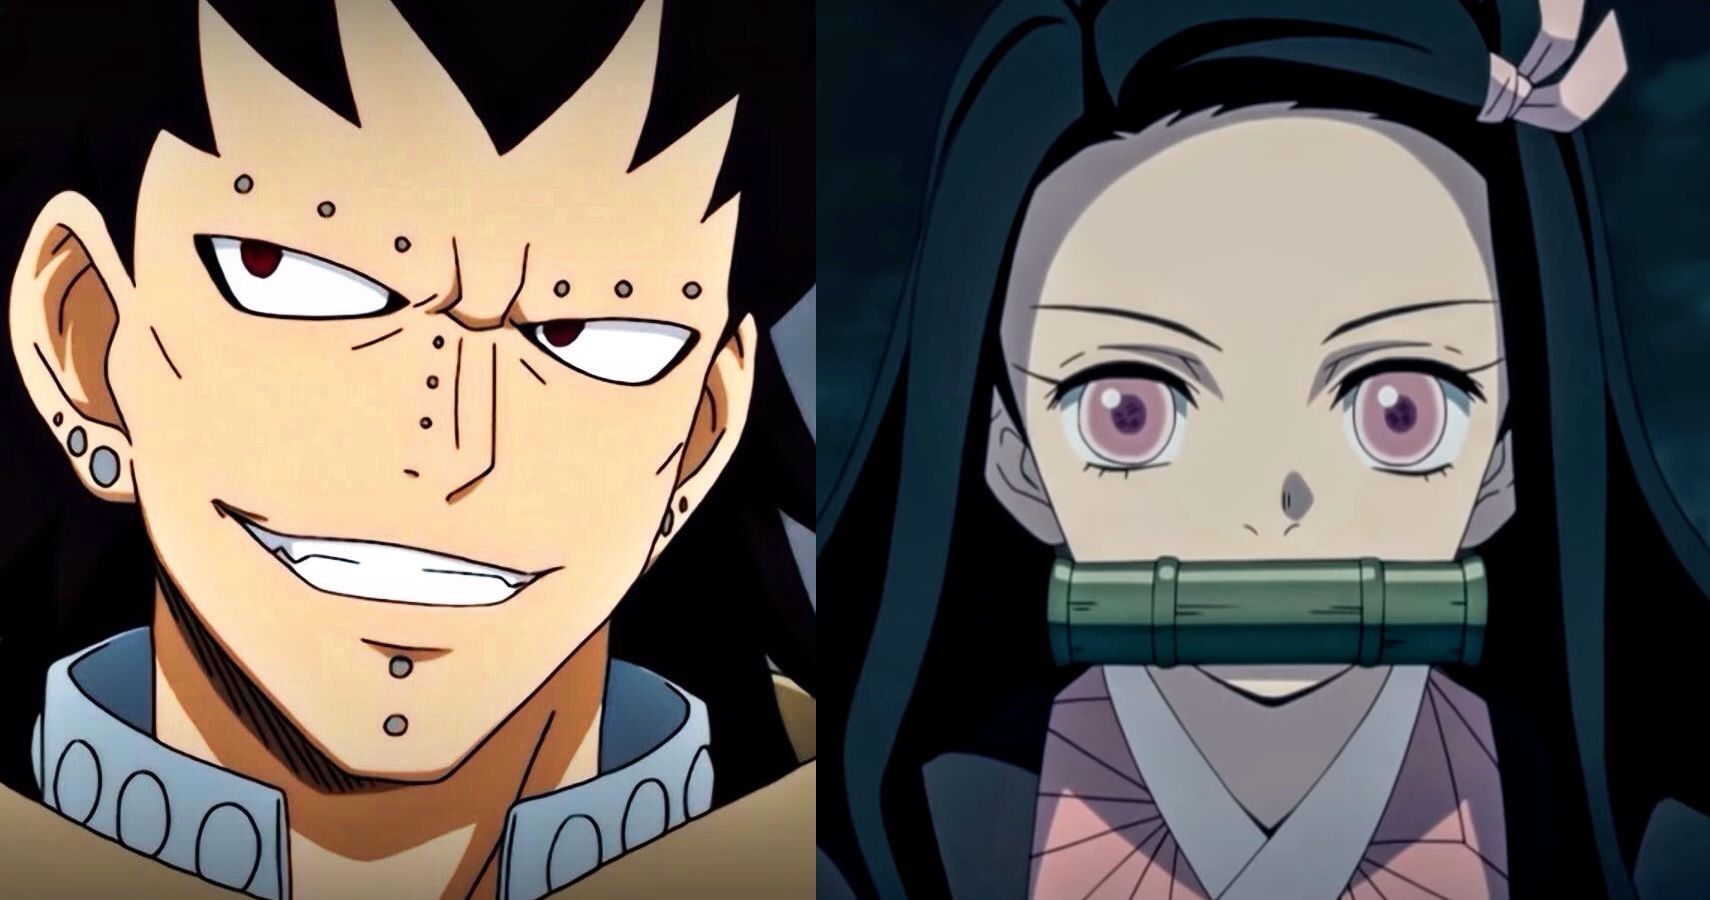 Naruto, Bleach and Fairy Tail Character Eye References